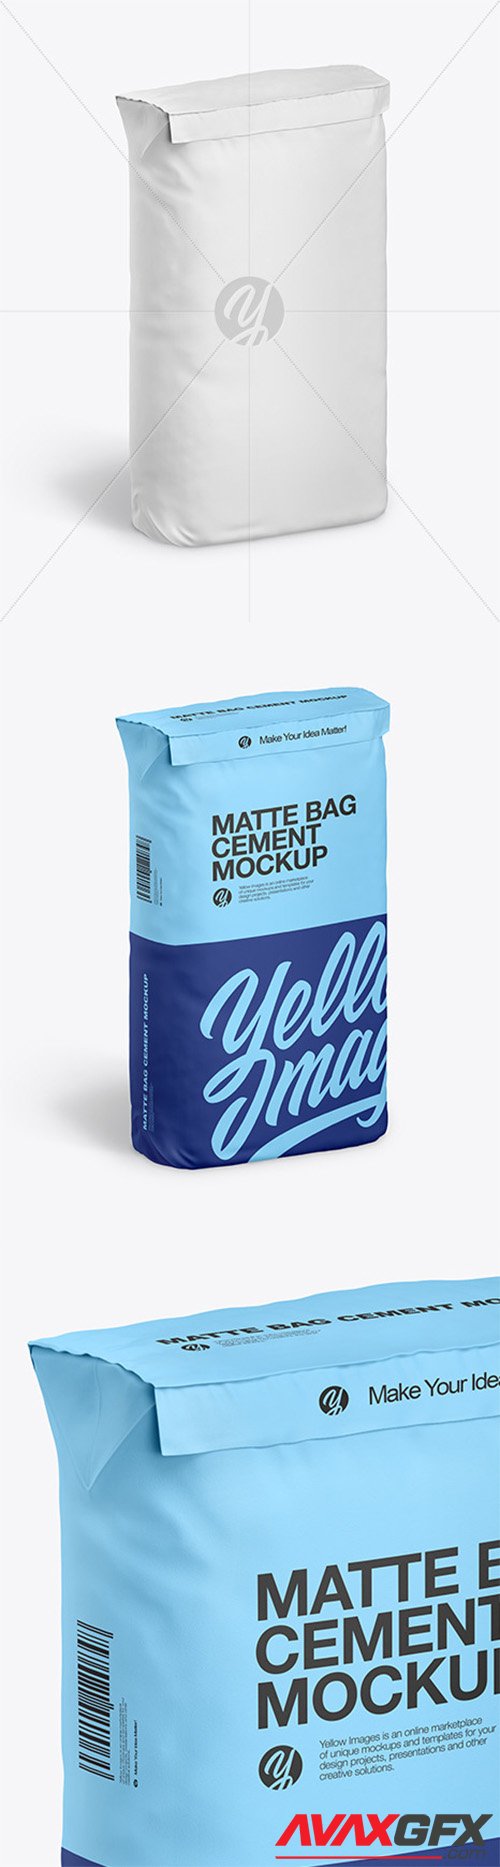 Download Matte Paper Cement Bag Mockup 57253 » AVAXGFX - All Downloads that You Need in One Place ...